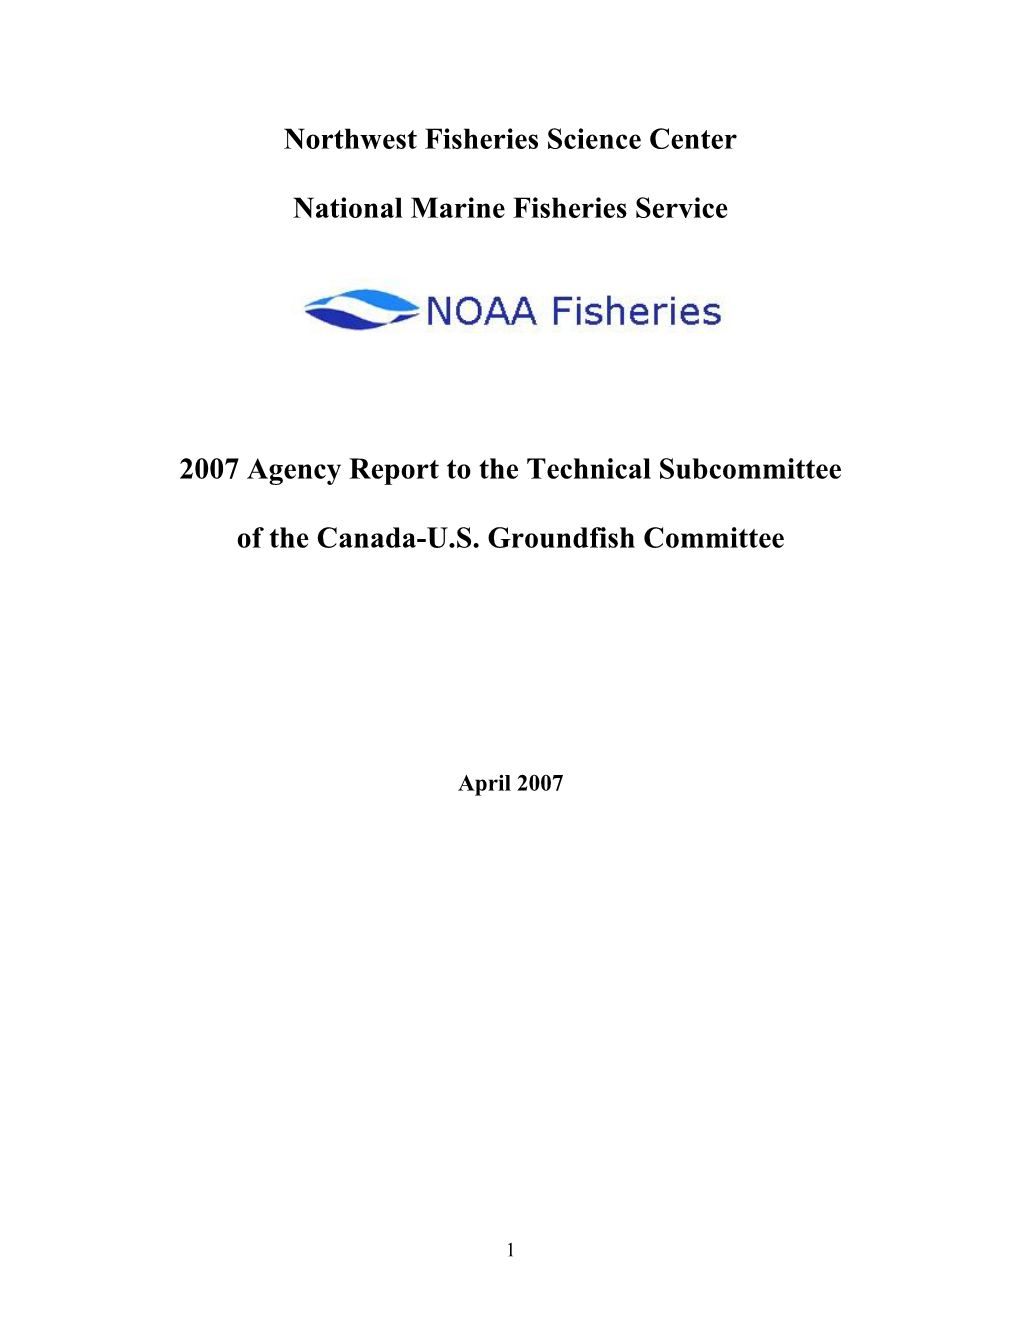 2007 Agency Report to the Technical Subcommittee